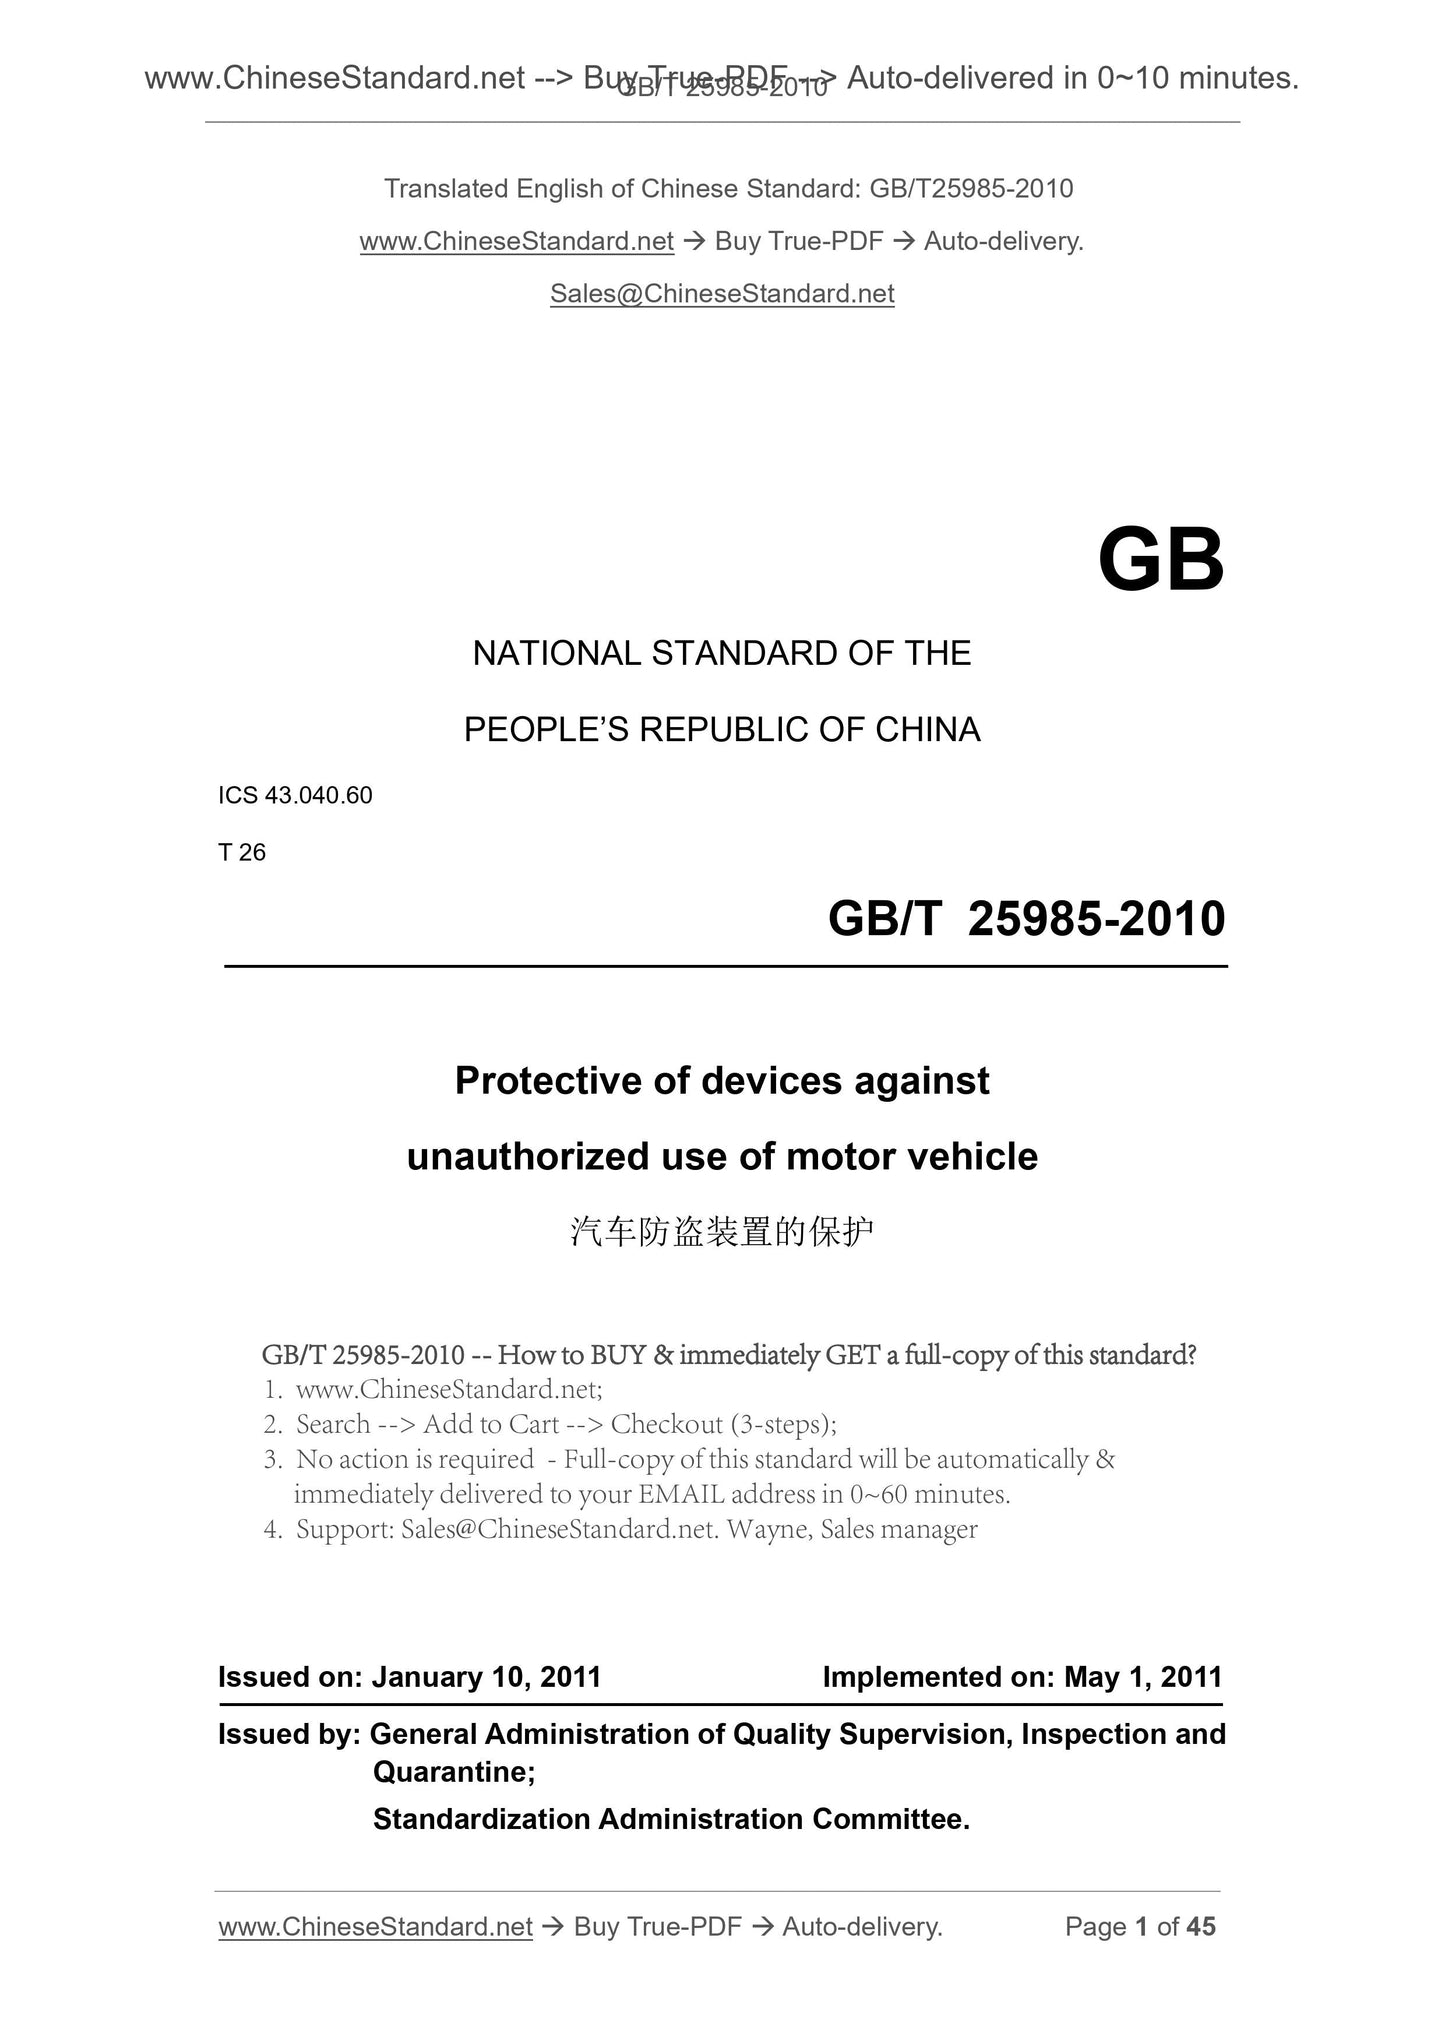 GB/T 25985-2010 Page 1